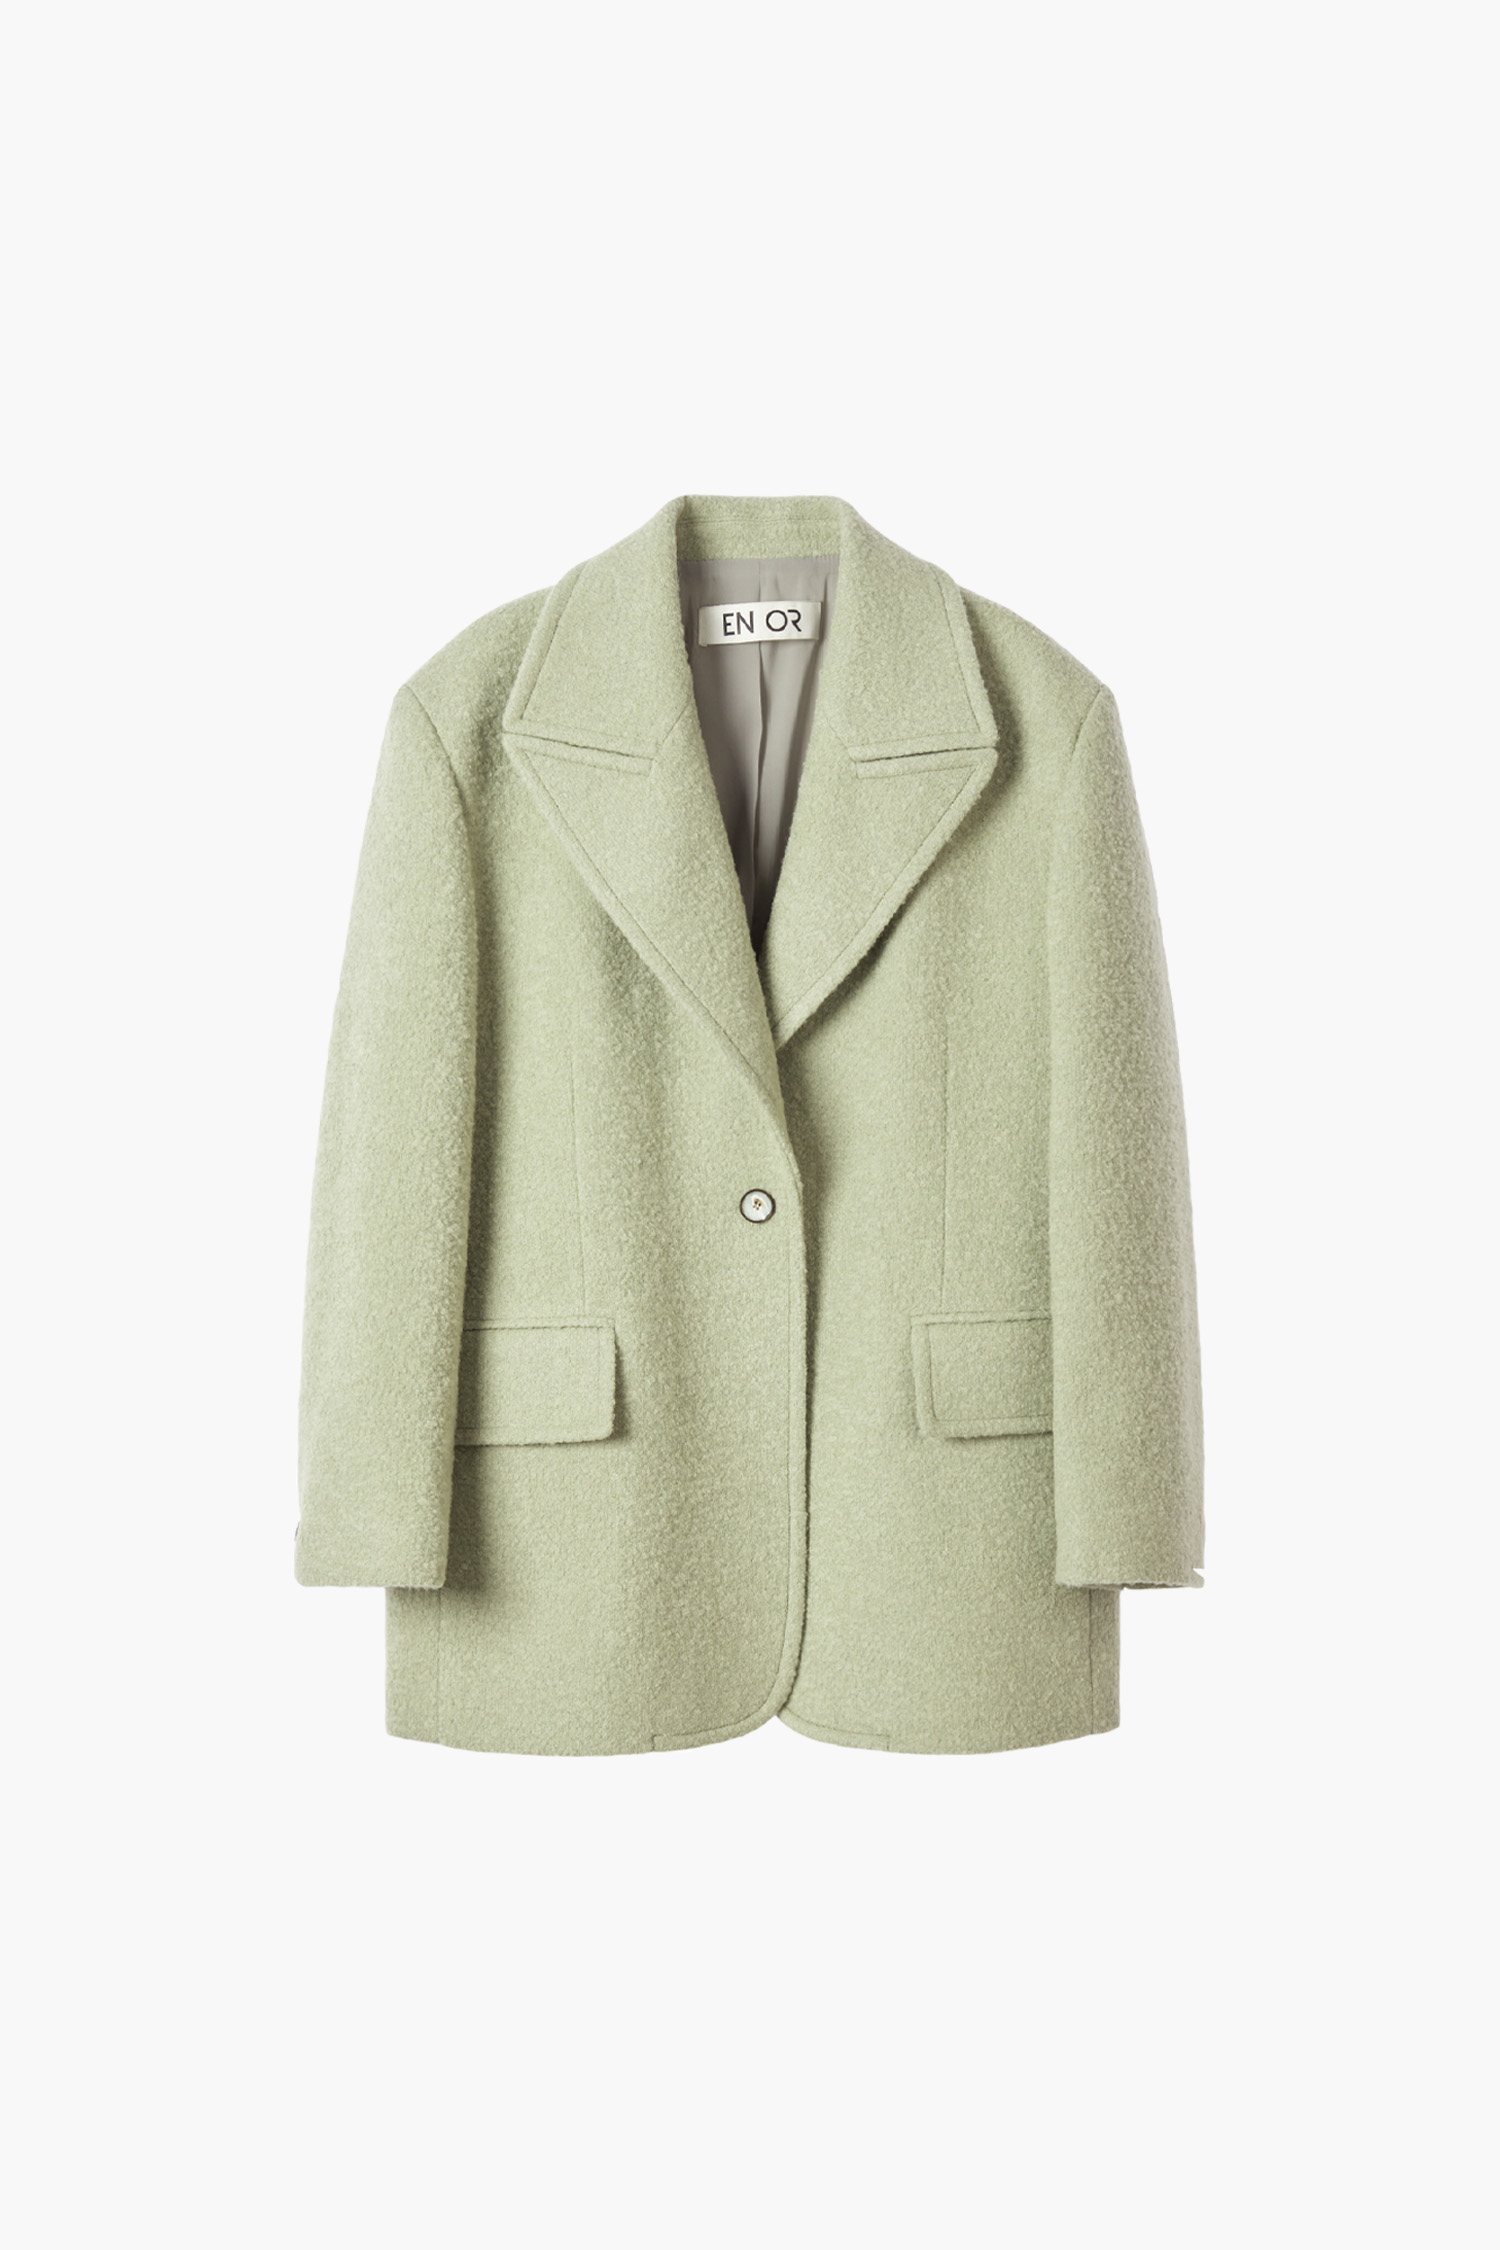 WIDE LAPEL COLLARED JACKET - GREEN